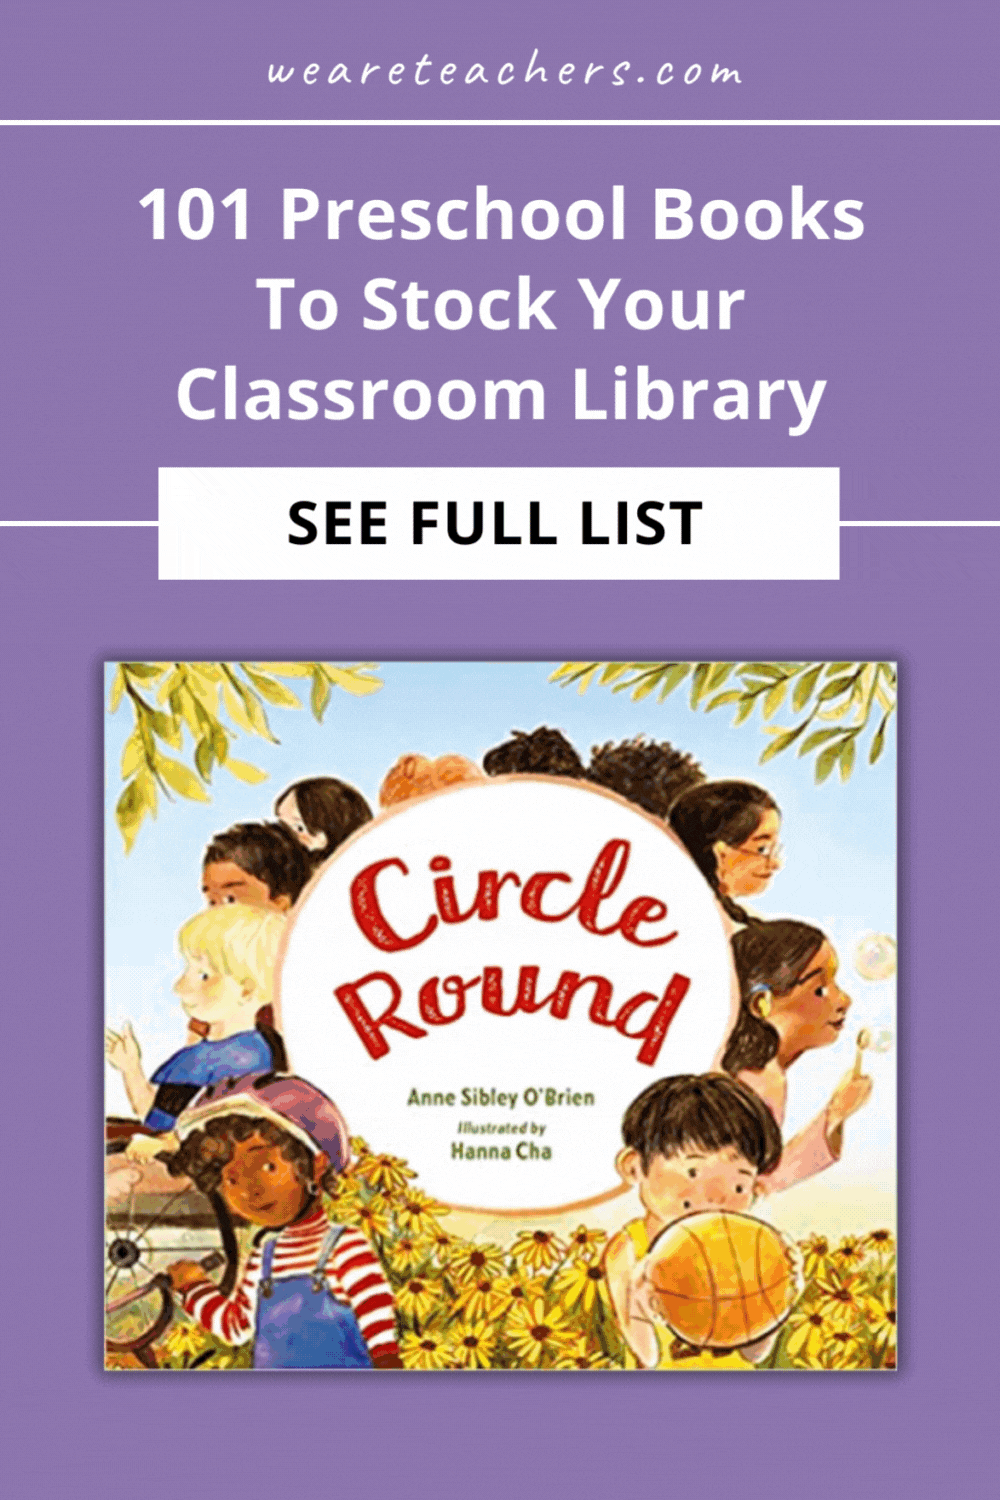 Time to update your preschool book collection? Check out our mega-list of preschool books on all kinds of popular topics!